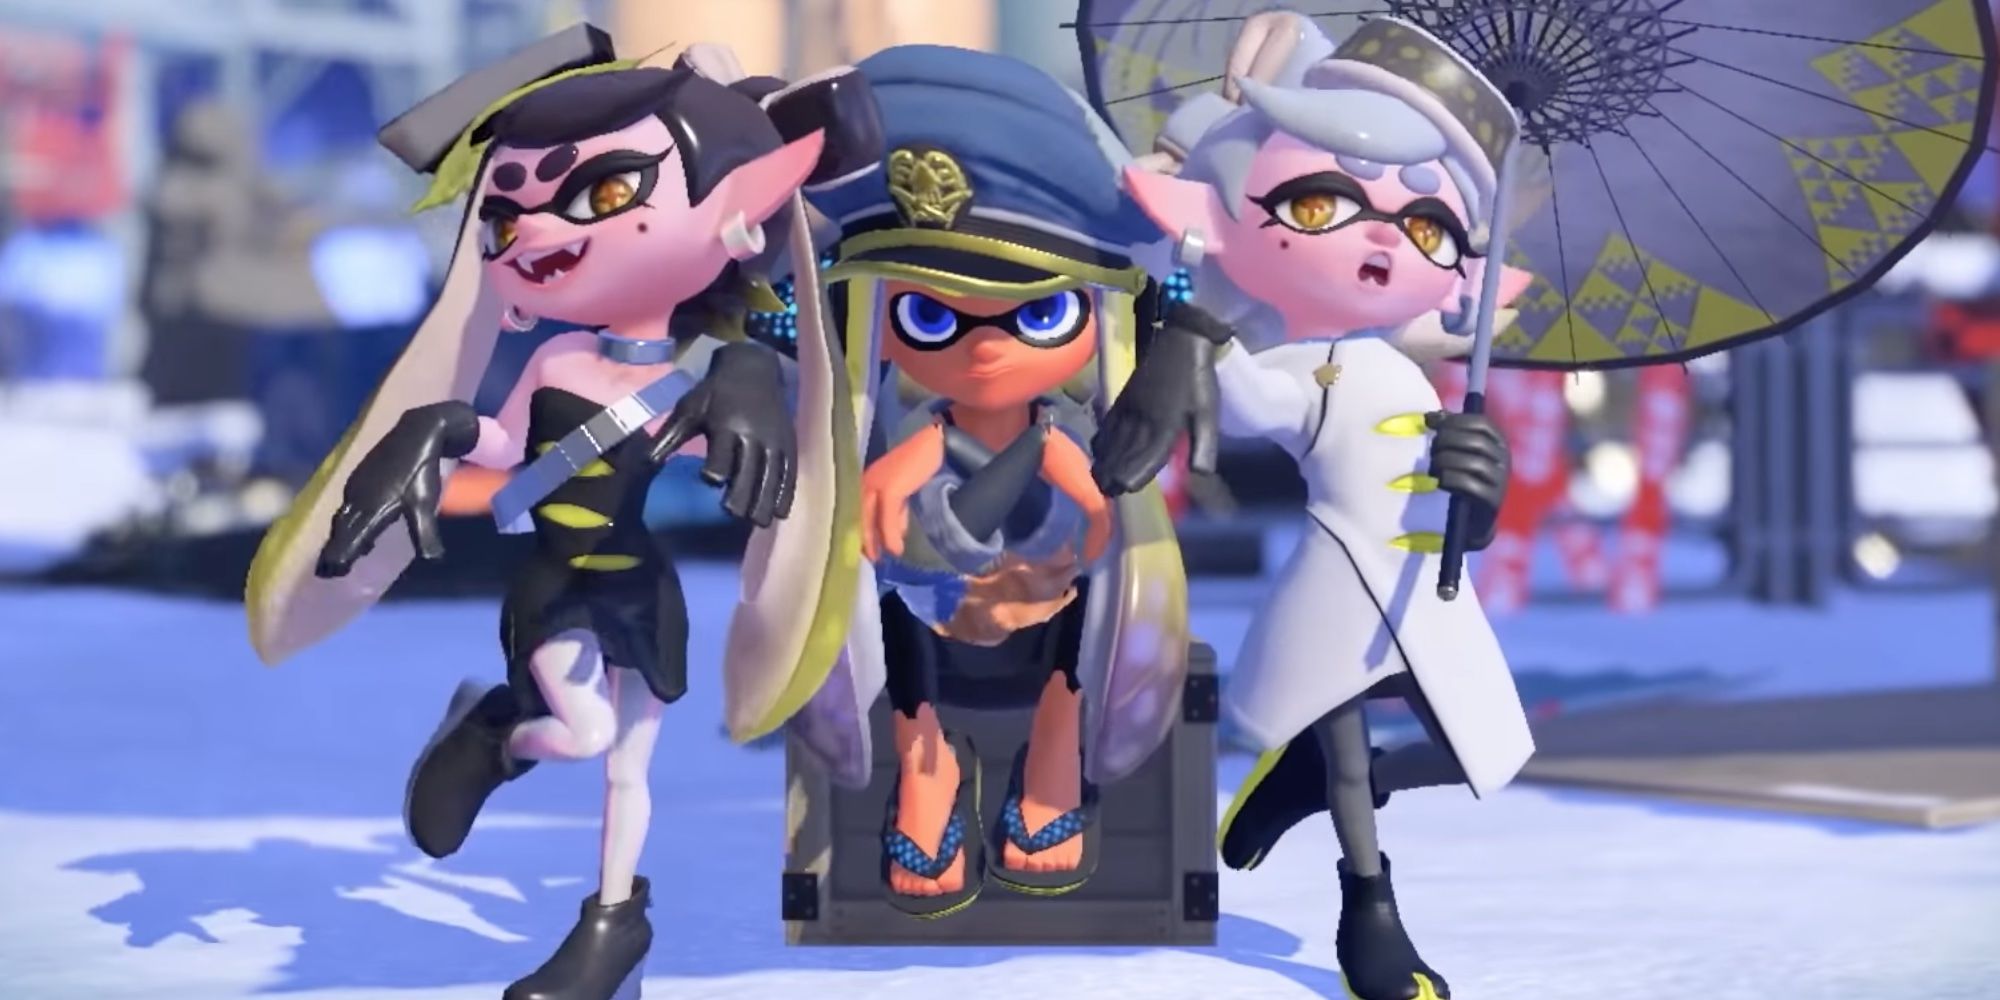 Squid Sisters and Agent 3 from Splatoon 3